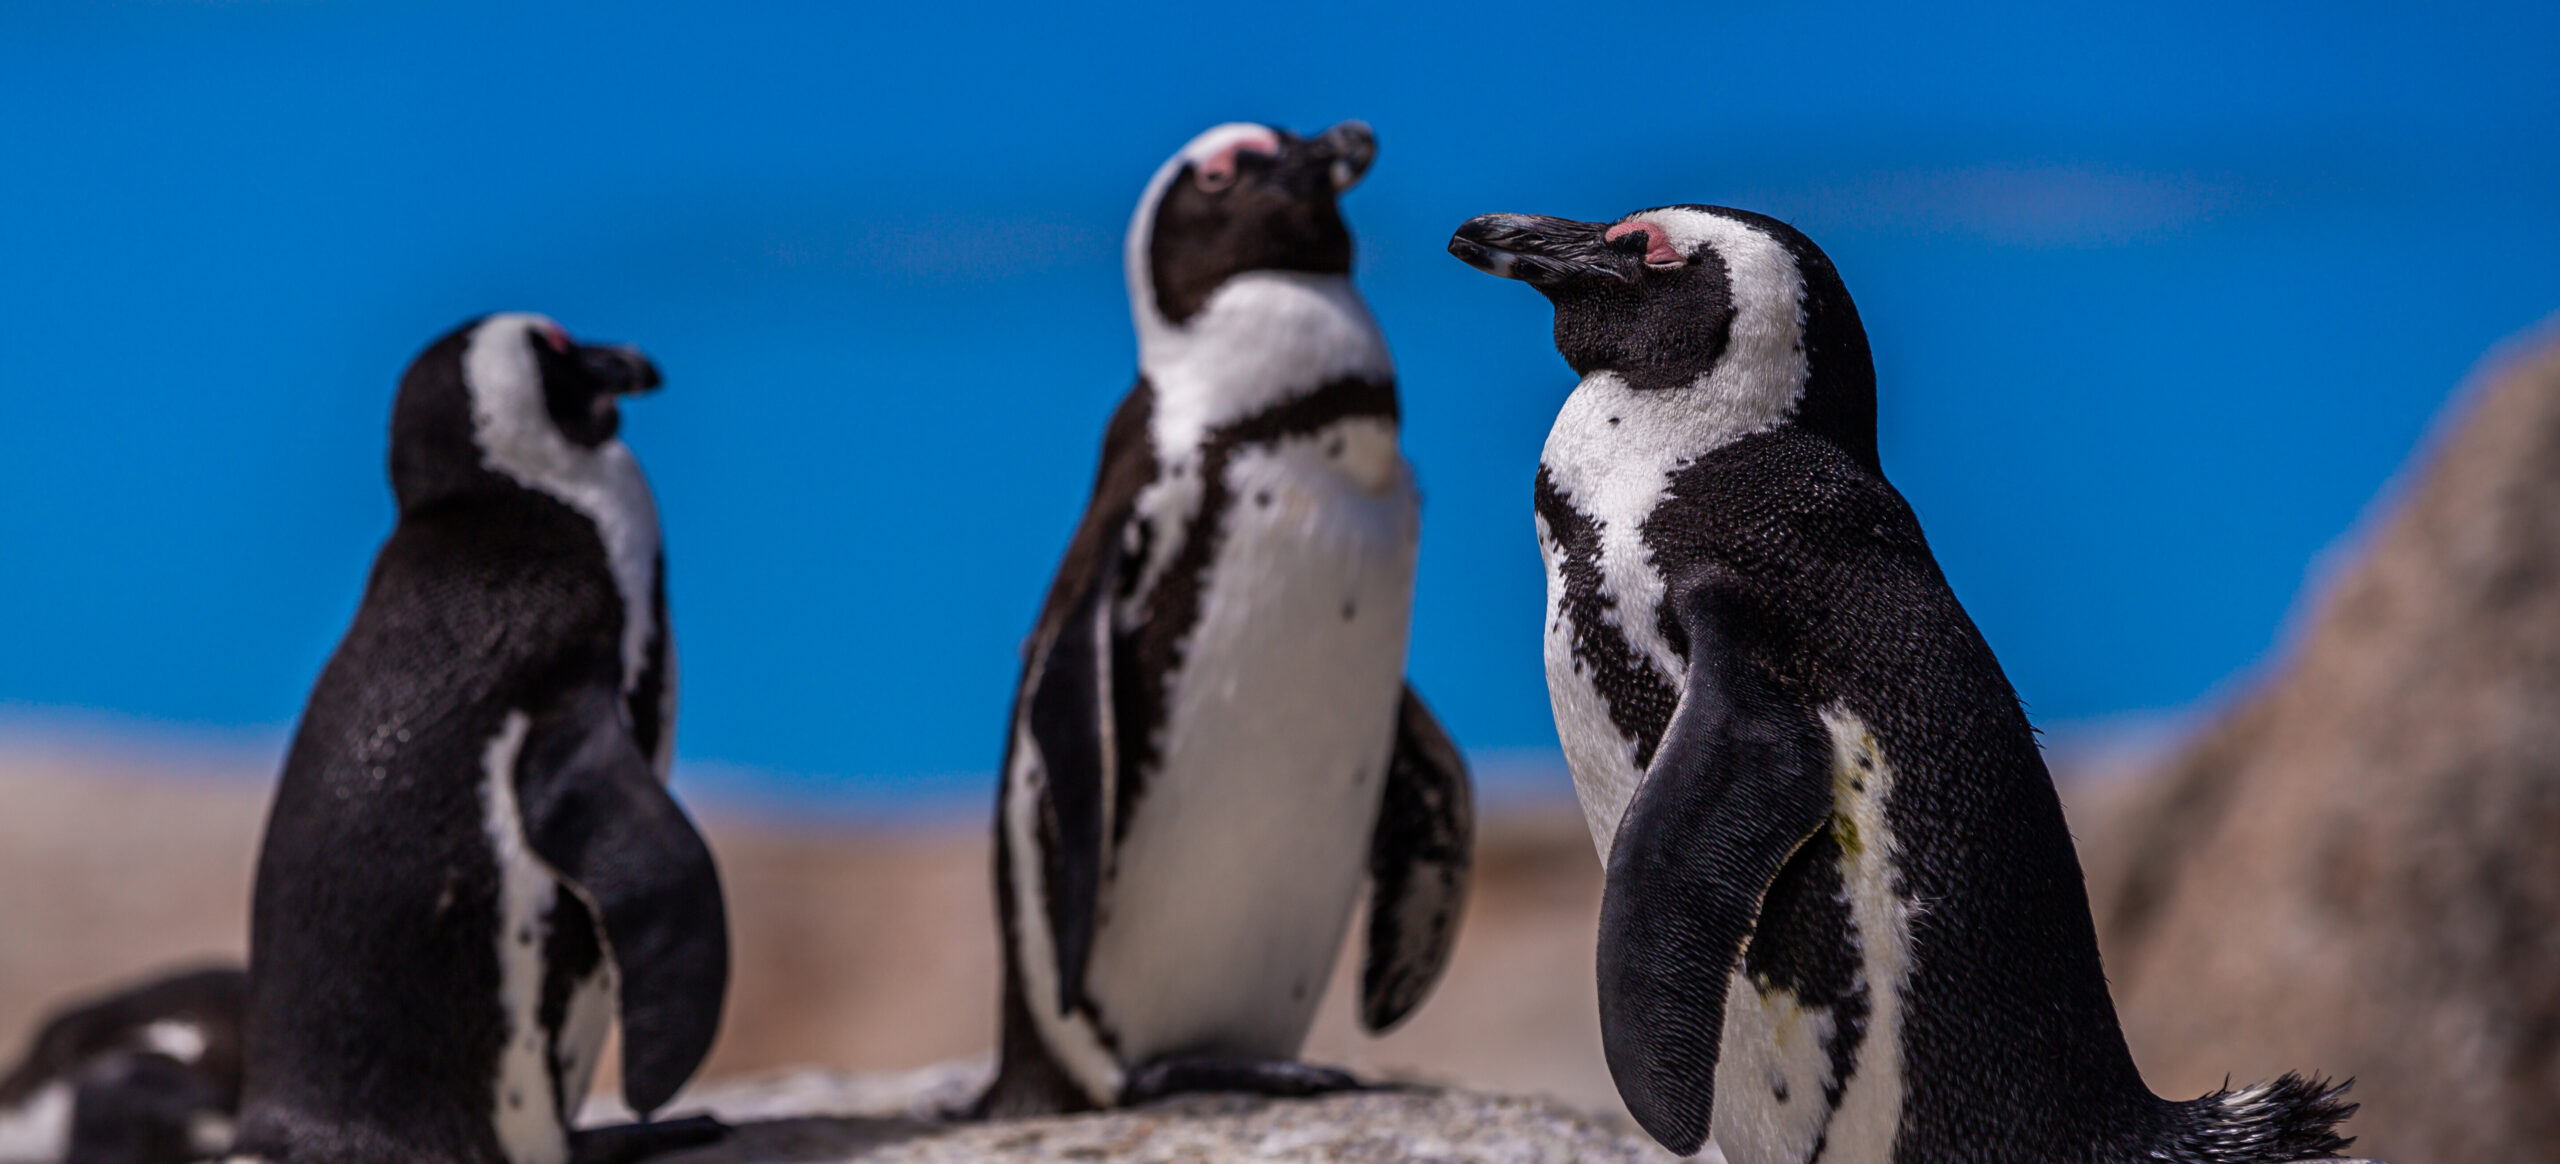 5 Surprising Penguin Facts That Will Melt Your Heart!